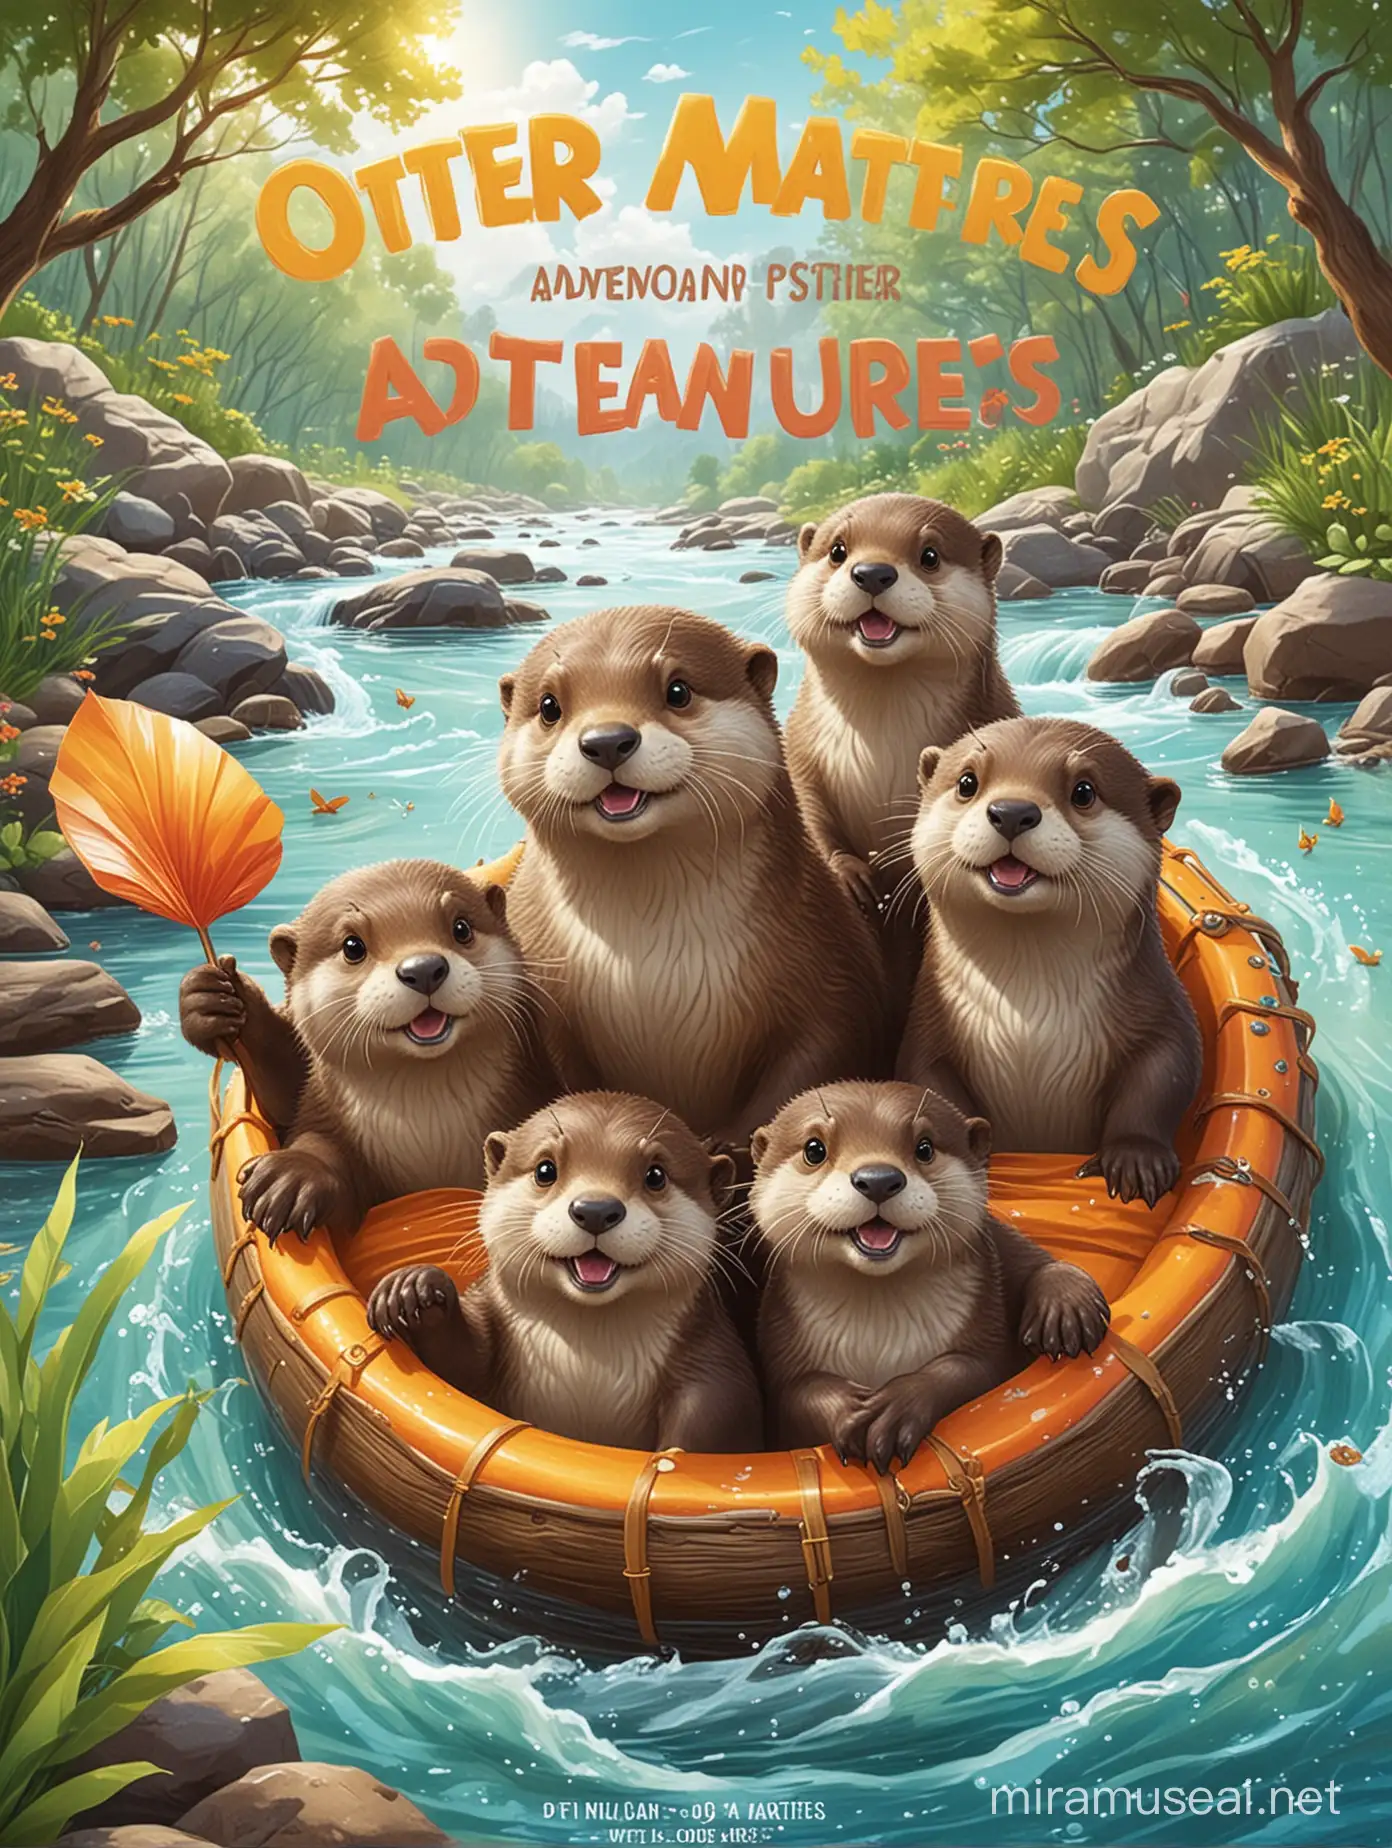 "Create a children's book cover titled 'Otter Adventures', featuring playful otters engaging in activities like sliding and floating in a vibrant river setting. Incorporate bright colors, a sunny sky, and greenery in the background. The title should use a whimsical, bold font in contrasting colors. Include visual hints of puzzles and mazes, and a 'Learn Fun Otter Facts!' badge. The cover should be glossy and suggest durability and fun educational content."